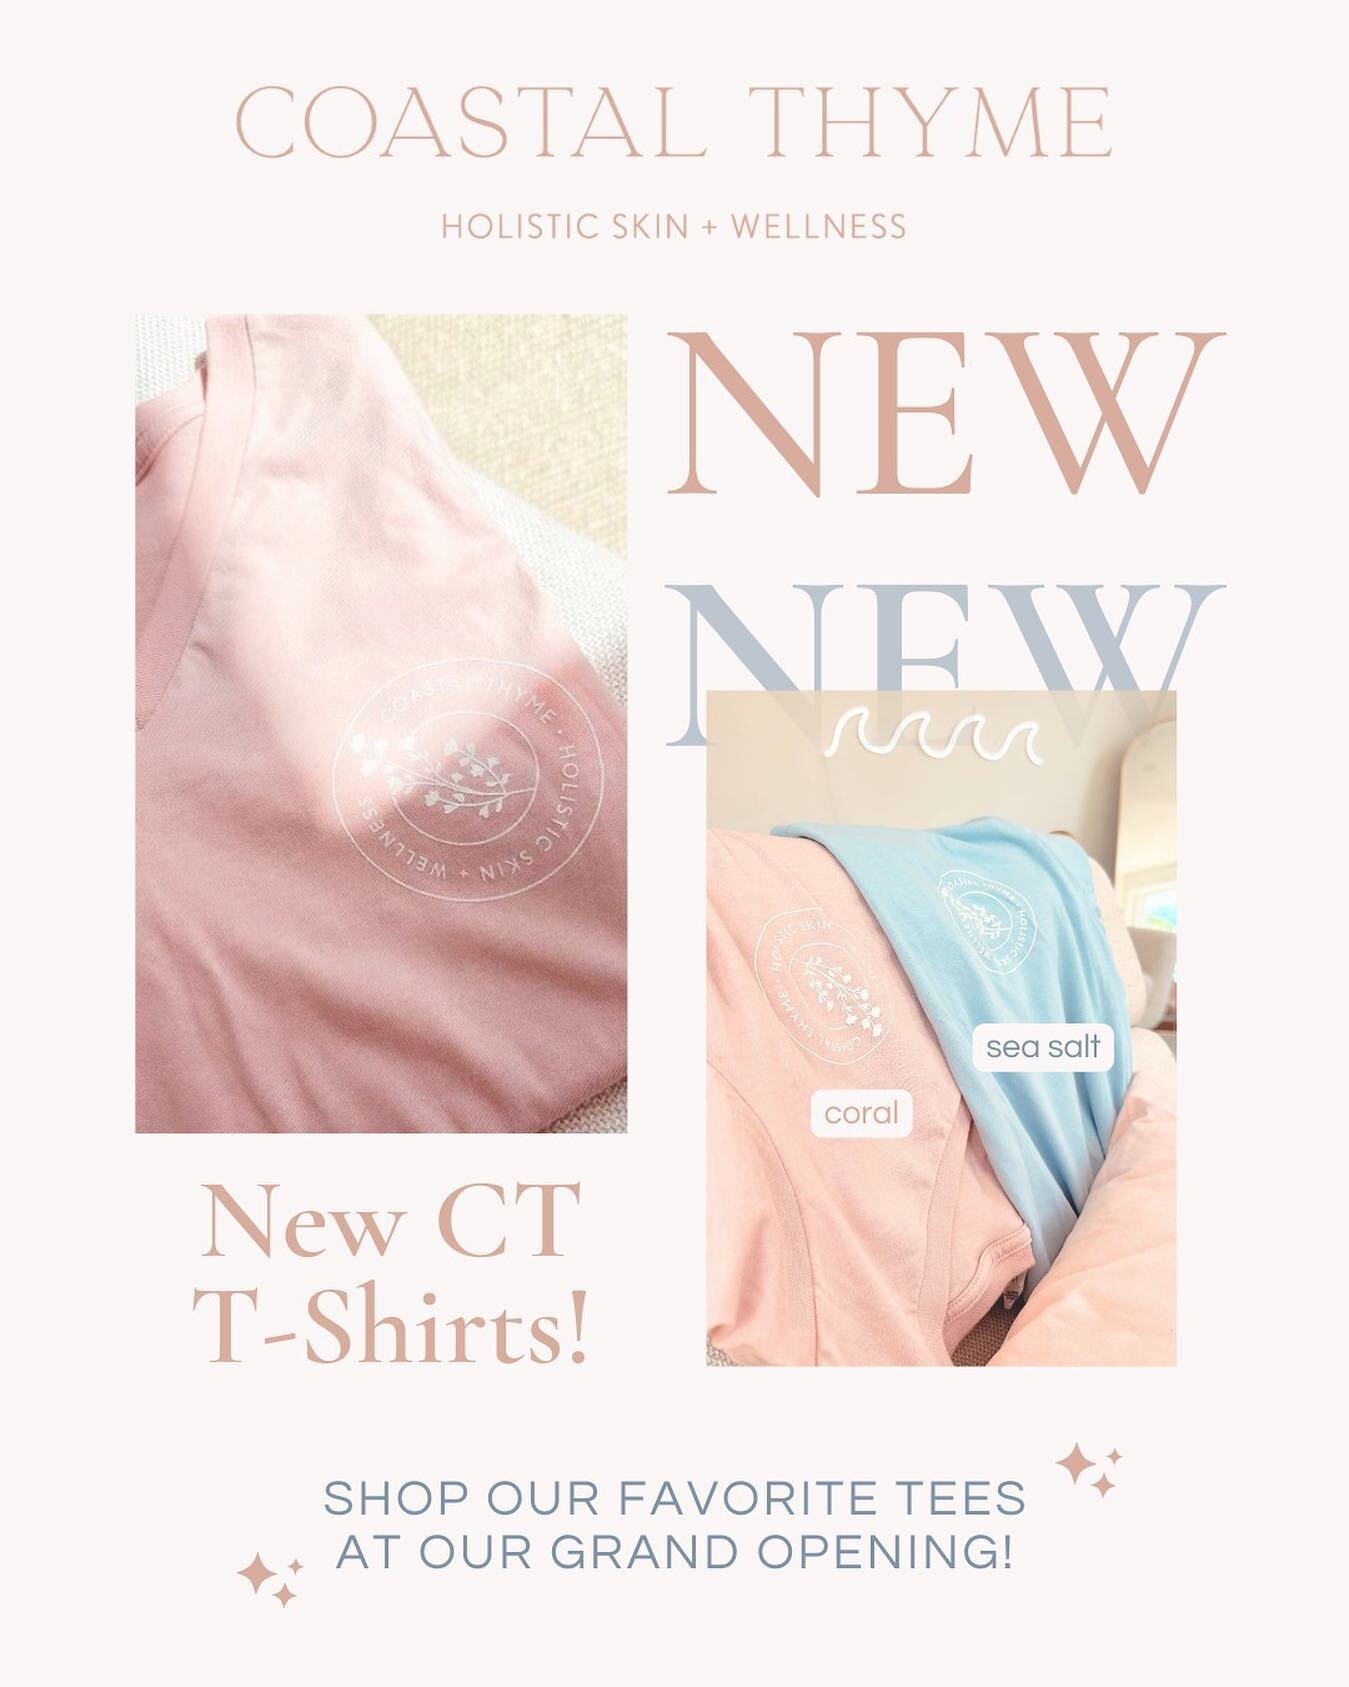 Introducing our ✨NEW✨ CT Tees! 🌊

You asked, we listened- now your favorite, softest, and most comfortable sweatshirts are now available in tees! 💕

We searched high and low for the best quality material, and we found it! 🤩✨

You&rsquo;re going to